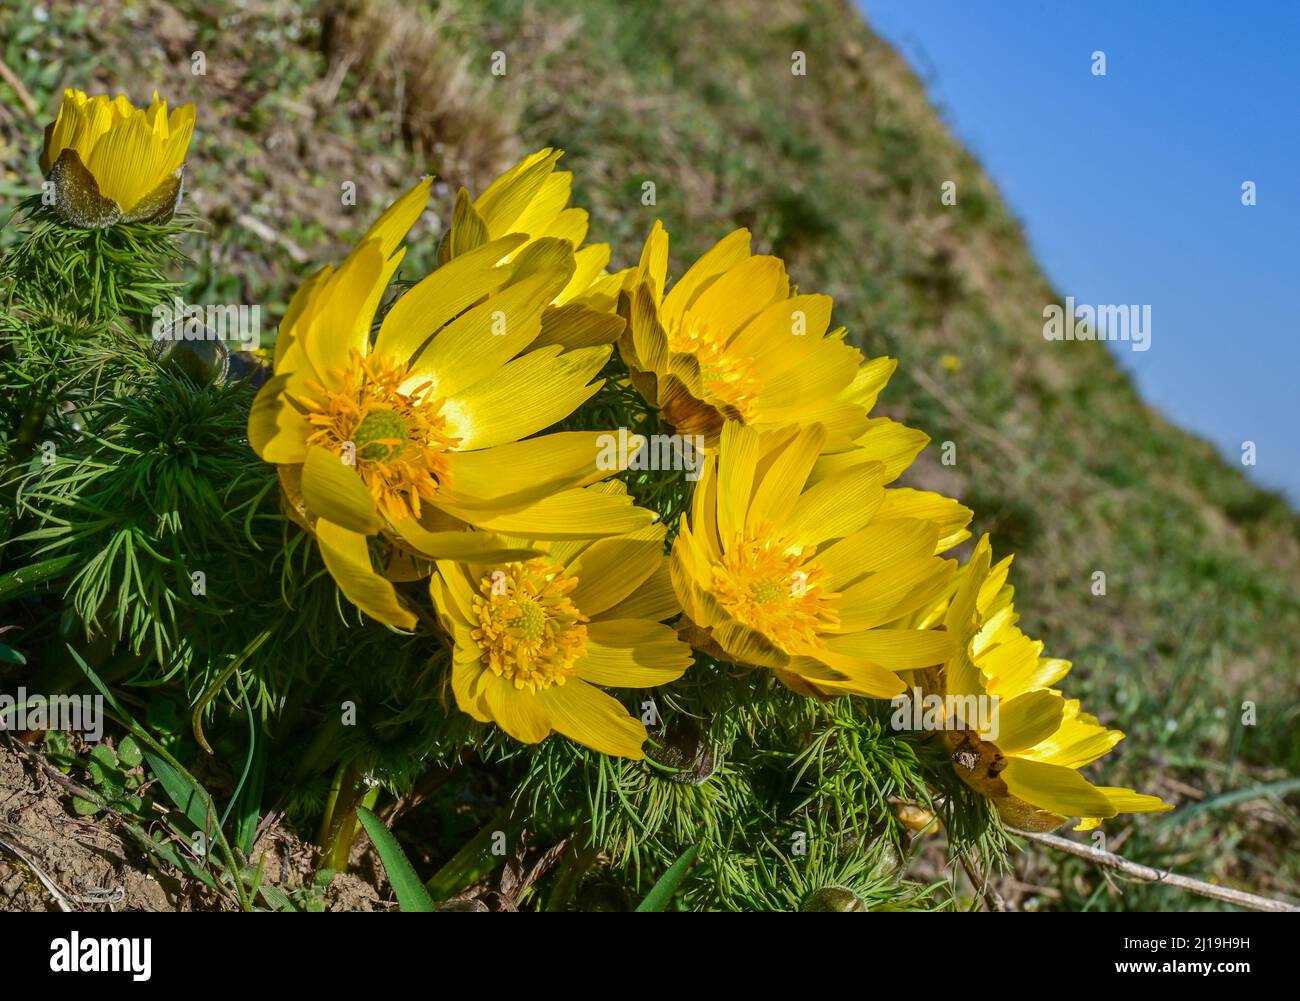 23 March 2022, Brandenburg, Lebus: Adonis florets bloom on the Oder slopes in the district of Märkisch-Oderland. The mild temperatures and warm sunshine of the last few days have led to the first Adonis florets blooming. The area between Lebus on the Oder and Mallnow on the Oderbruch edge in East Brandenburg is one of the largest contiguous Adonis rose areas in Europe. In Brandenburg, these strictly protected species only occur on the Pontic slopes north of Frankfurt (Oder). For the poisonous flowers, the area was declared a Trockerasen nature reserve in 1984. Photo: Patrick Pleul/dpa-Zentralb Stock Photo